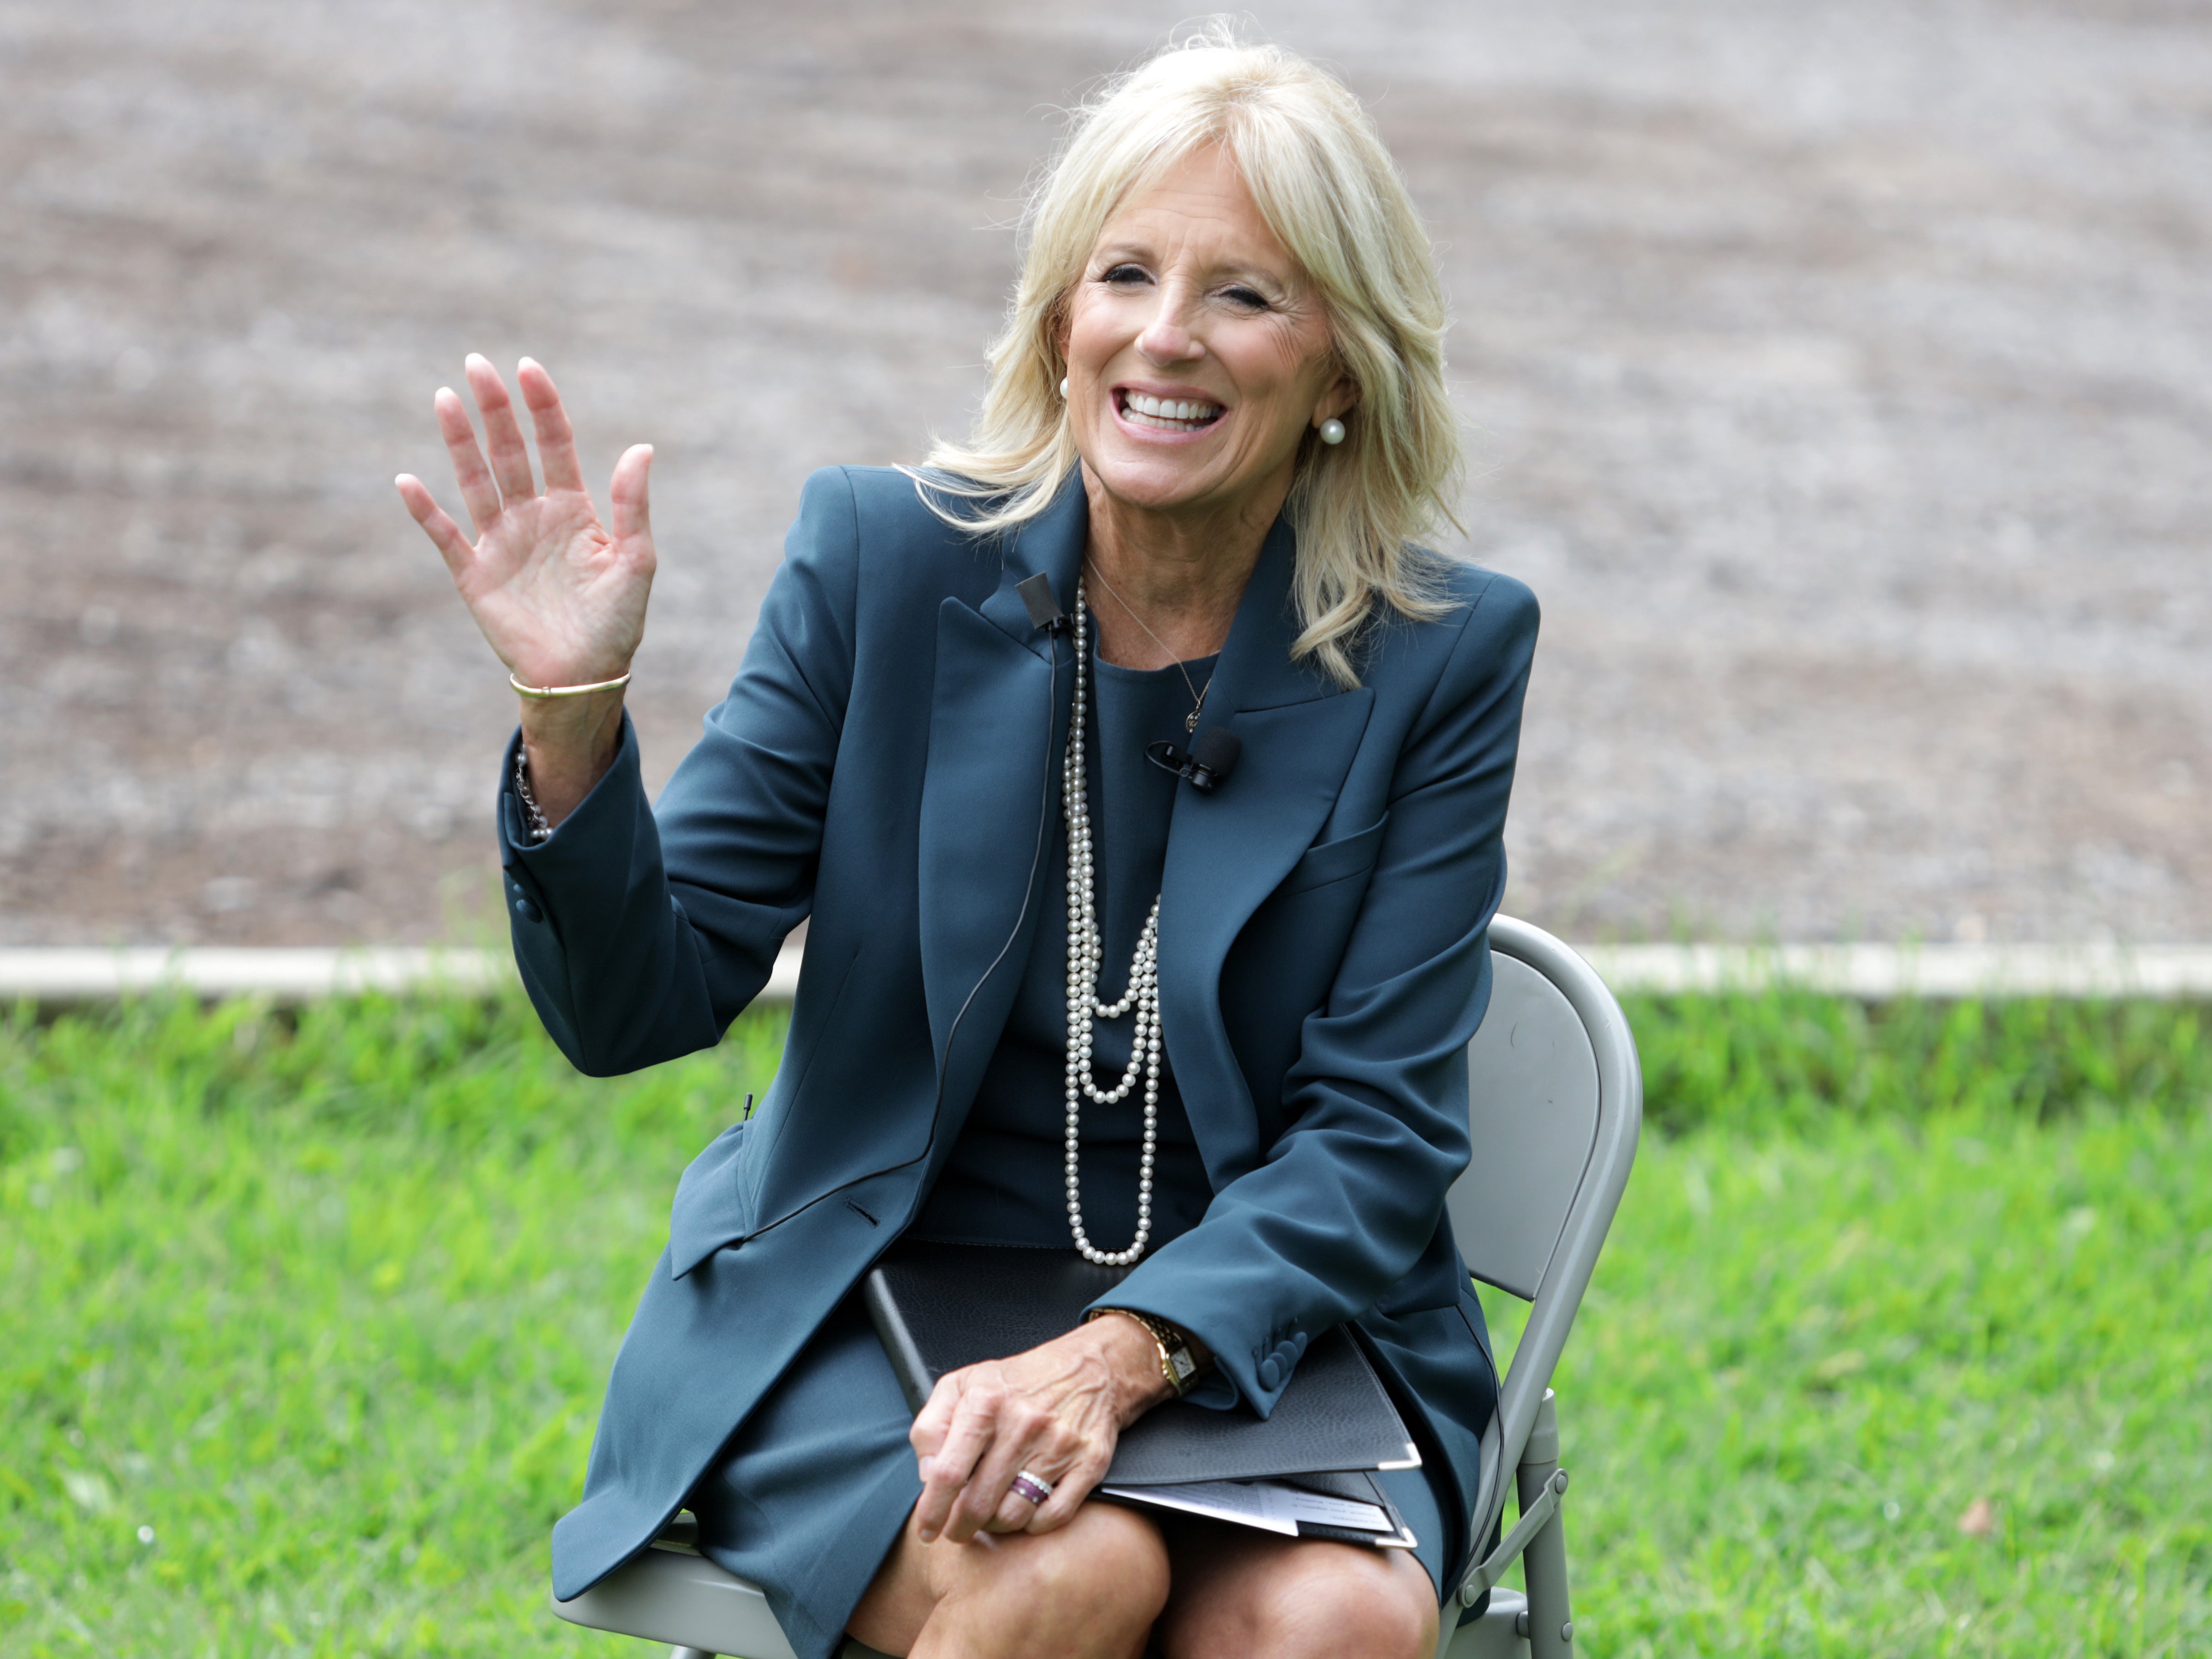 Dr Jill Biden shares advice for working mothers amid pandemic